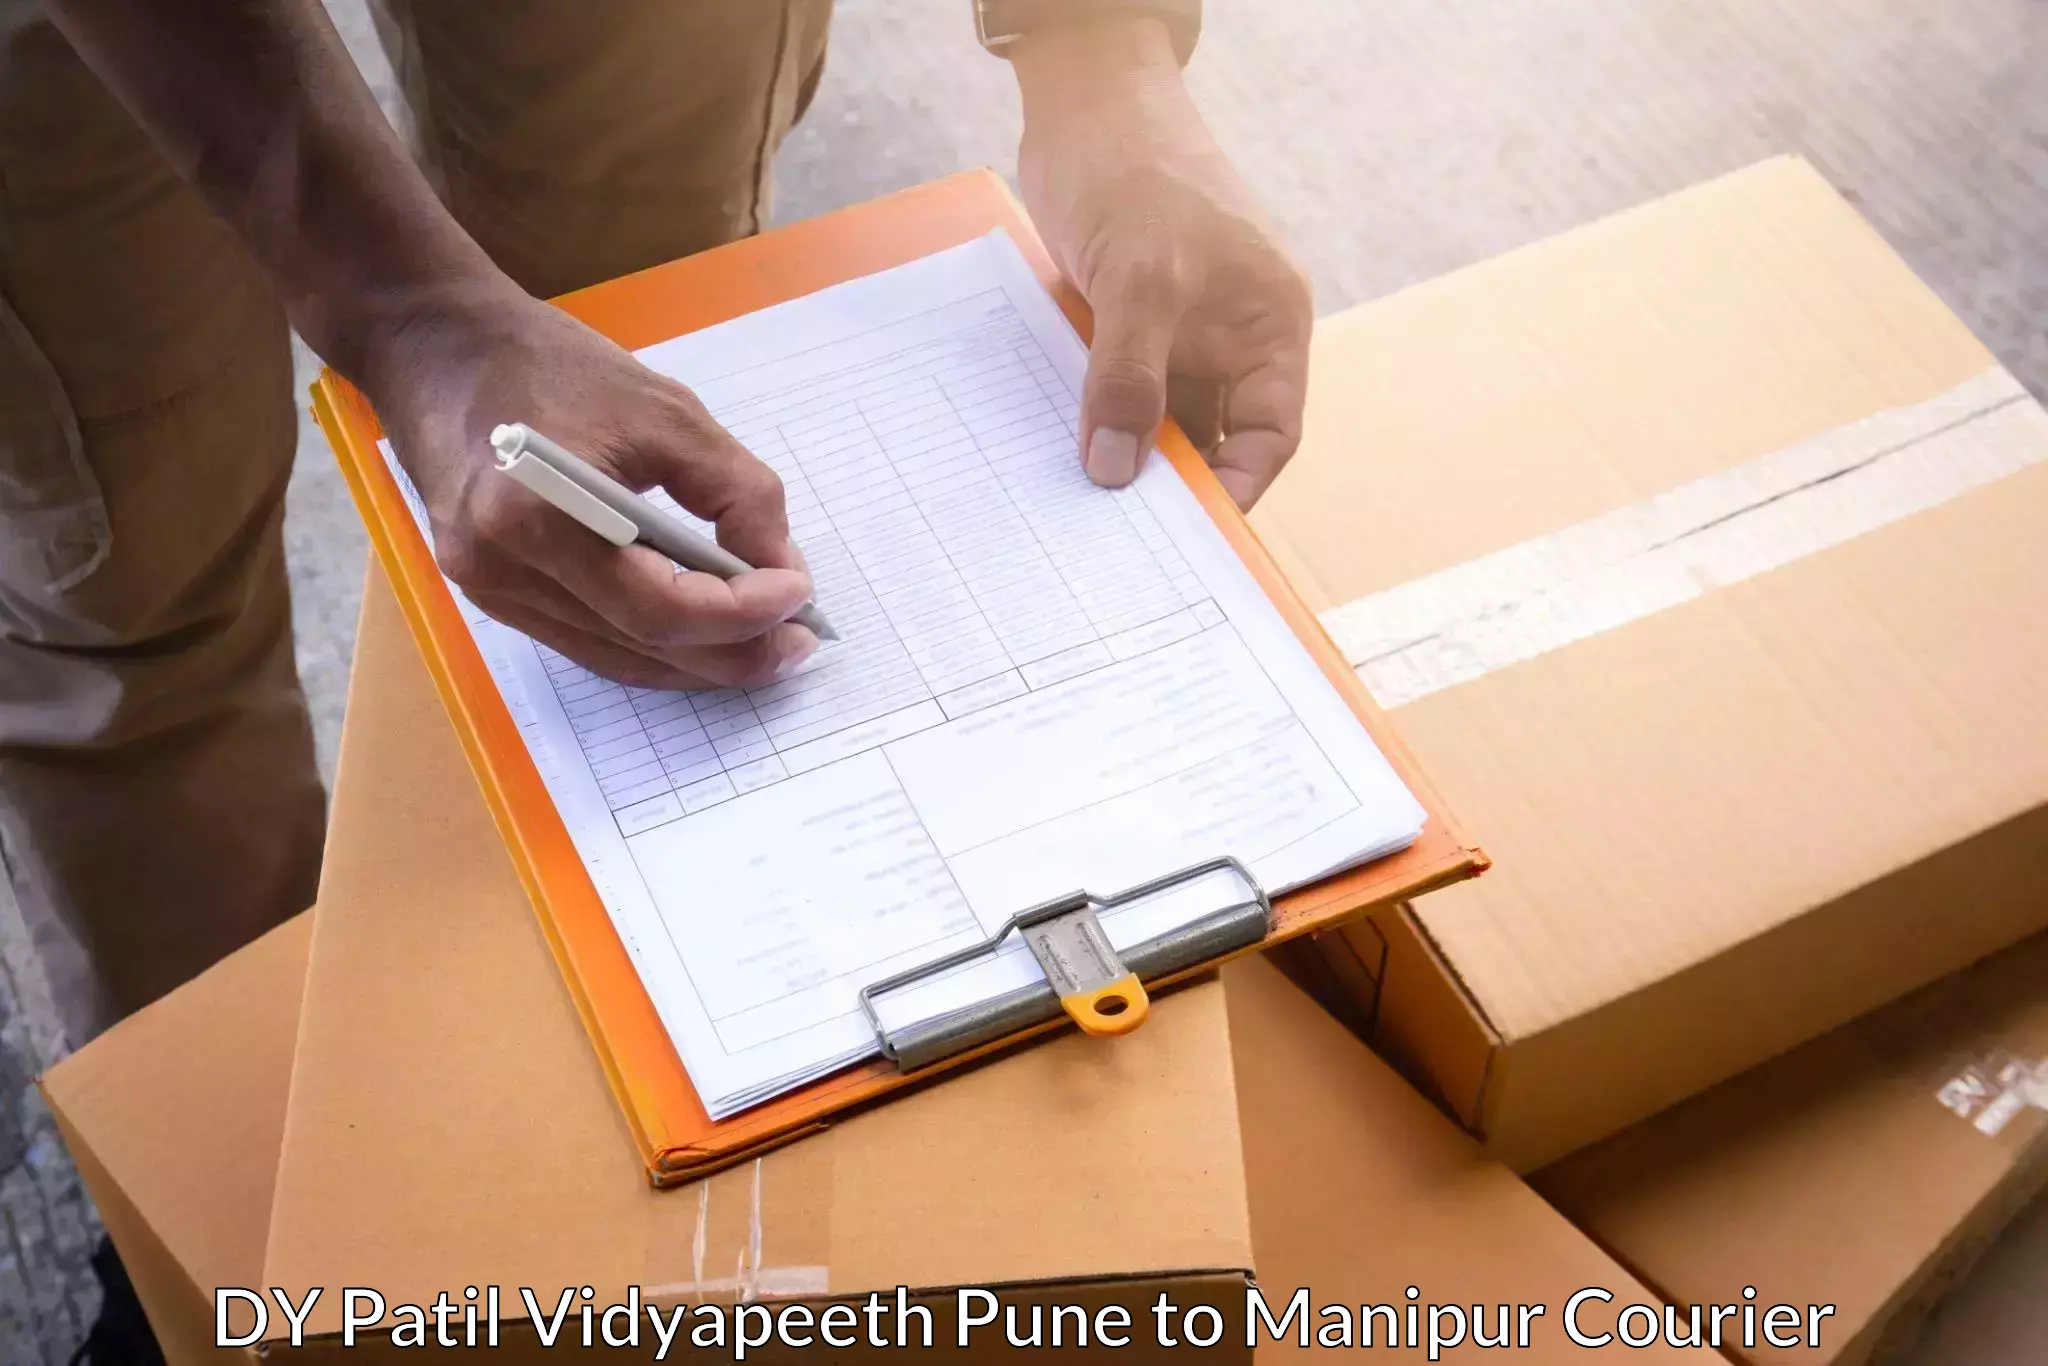 Automated parcel services DY Patil Vidyapeeth Pune to Tamenglong